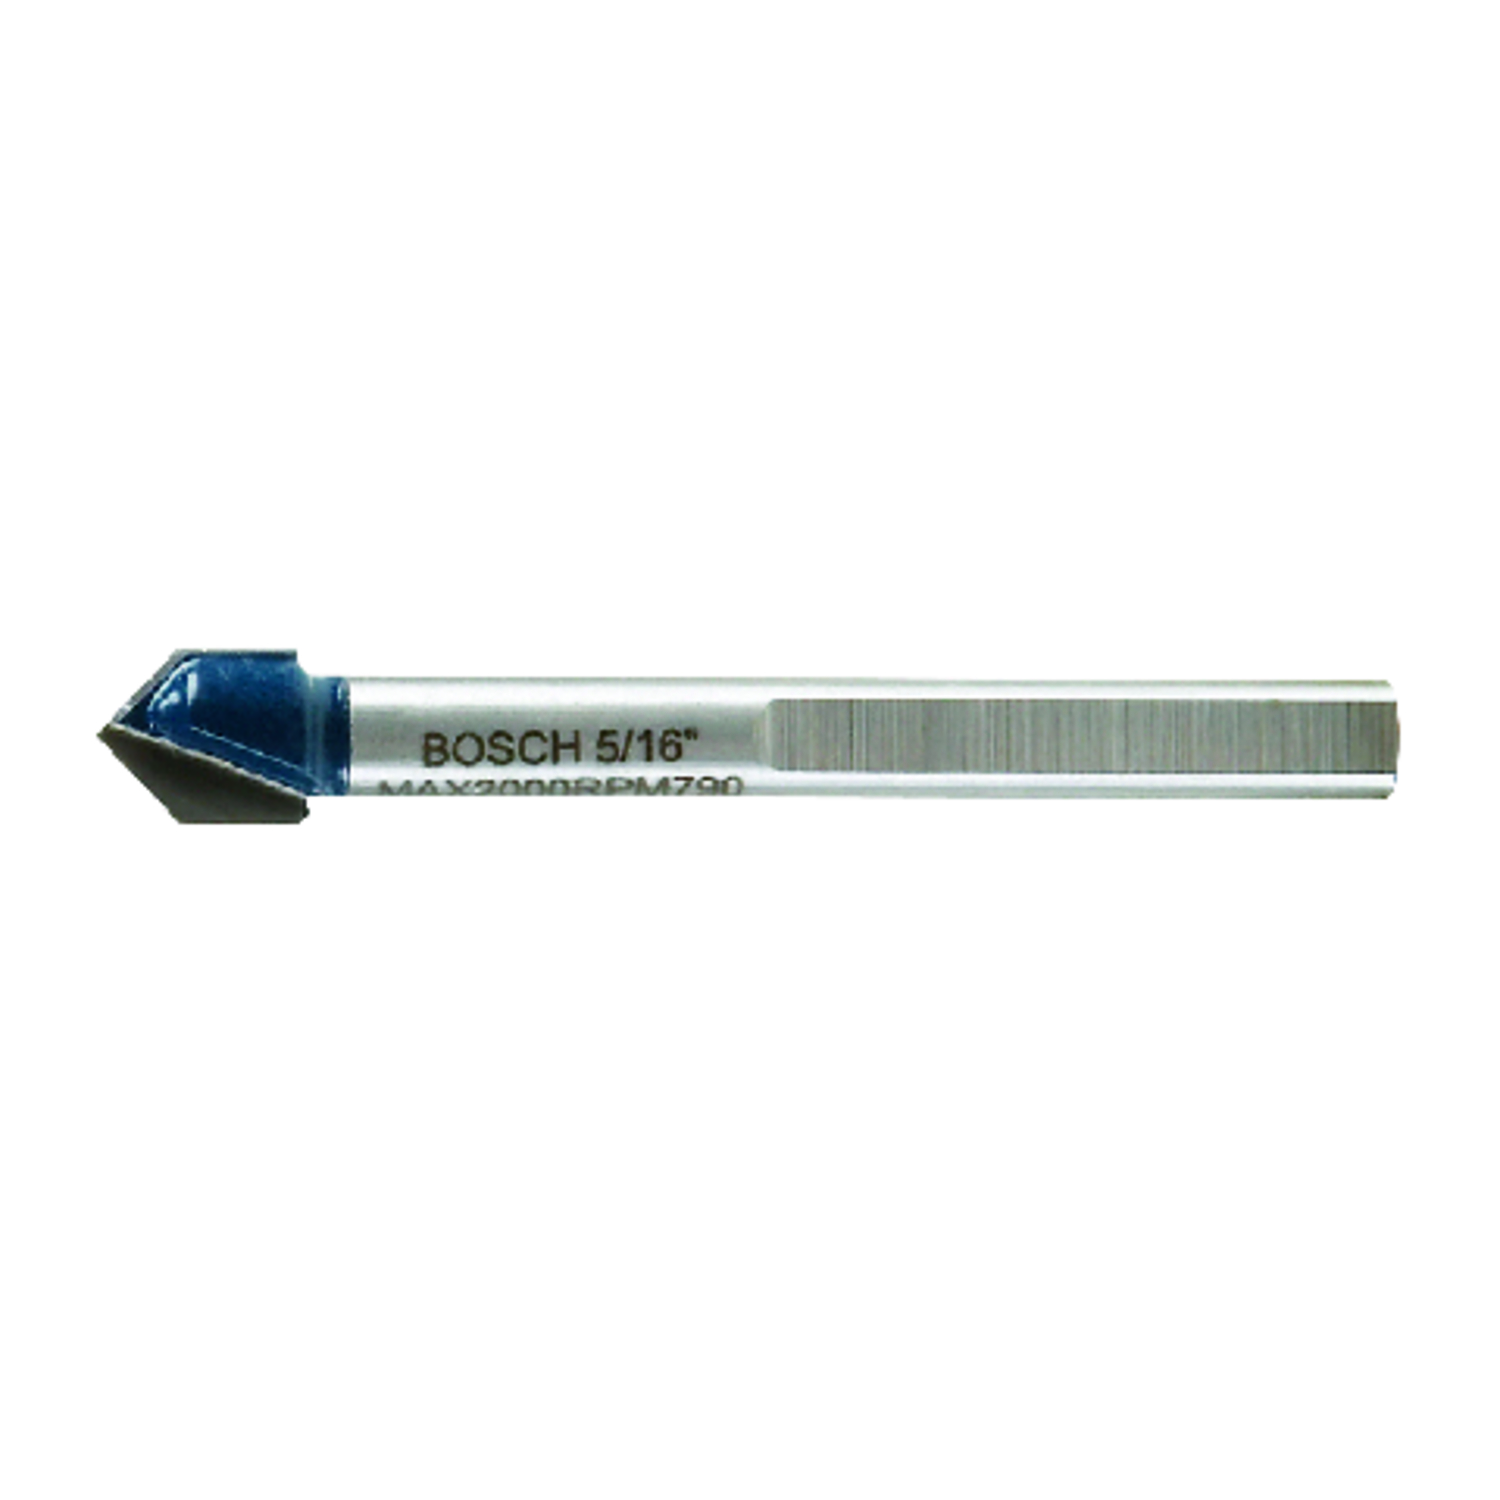 Bosch 5/16 in. X 4 in. L Carbide Tipped Glass and Tile Bit 1 pc